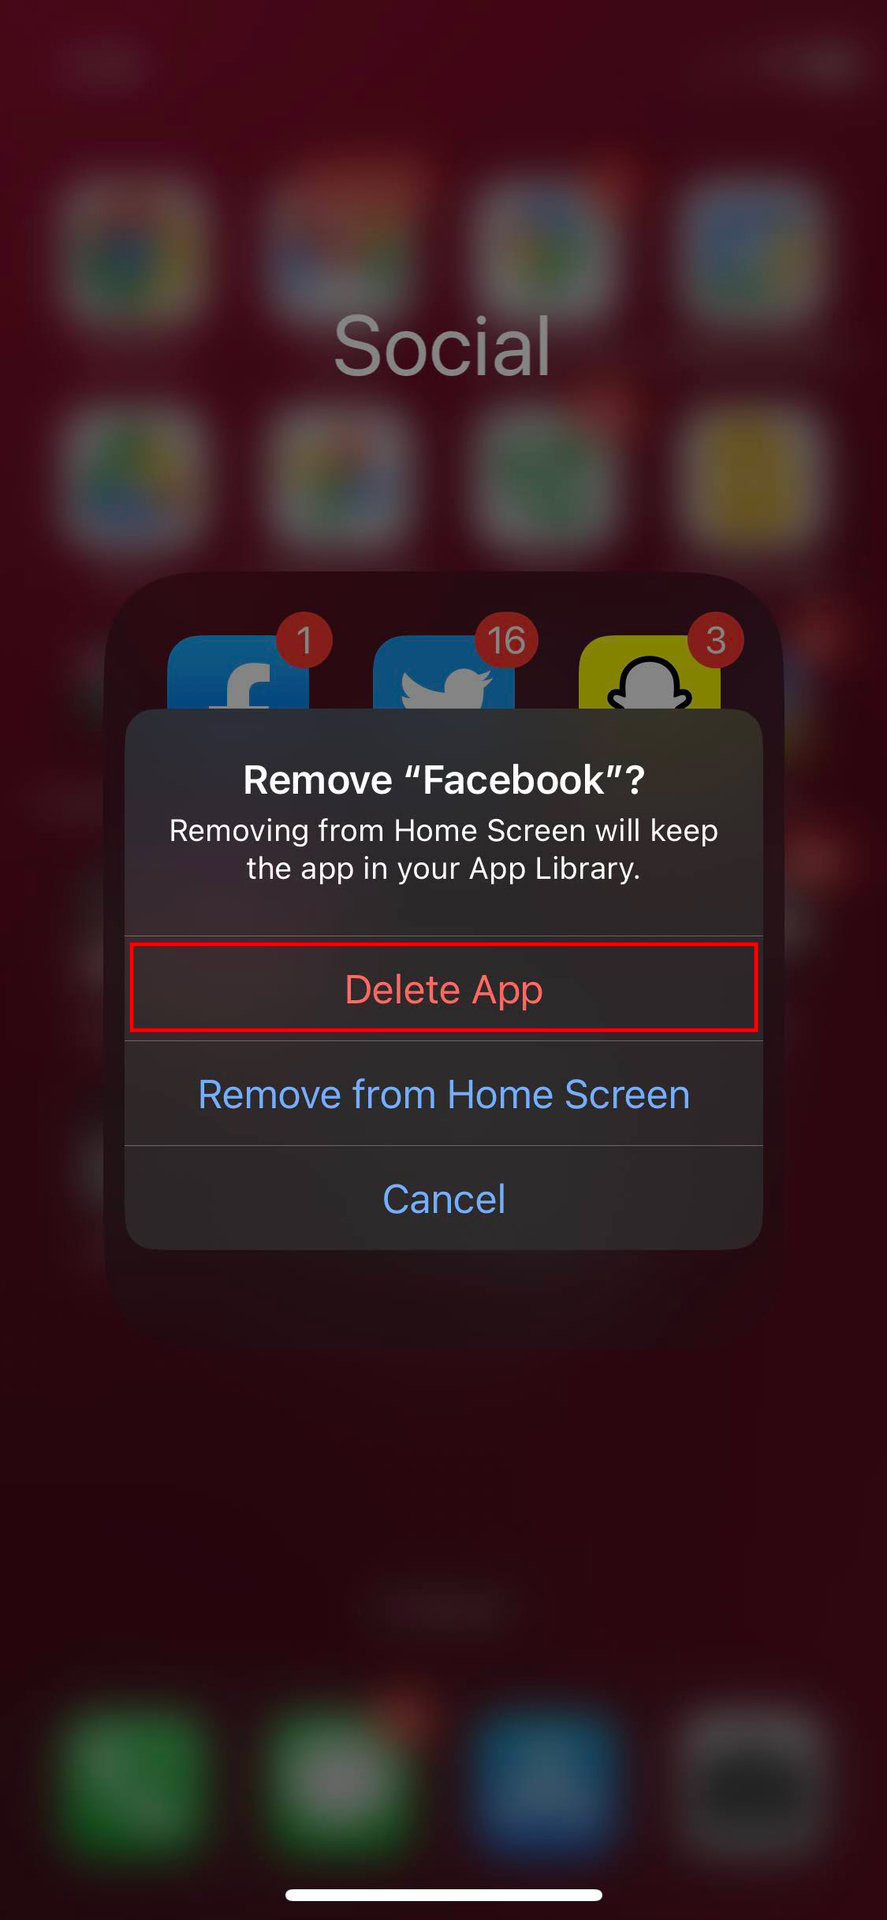 How to Fix “Logging into this app with Facebook is not available